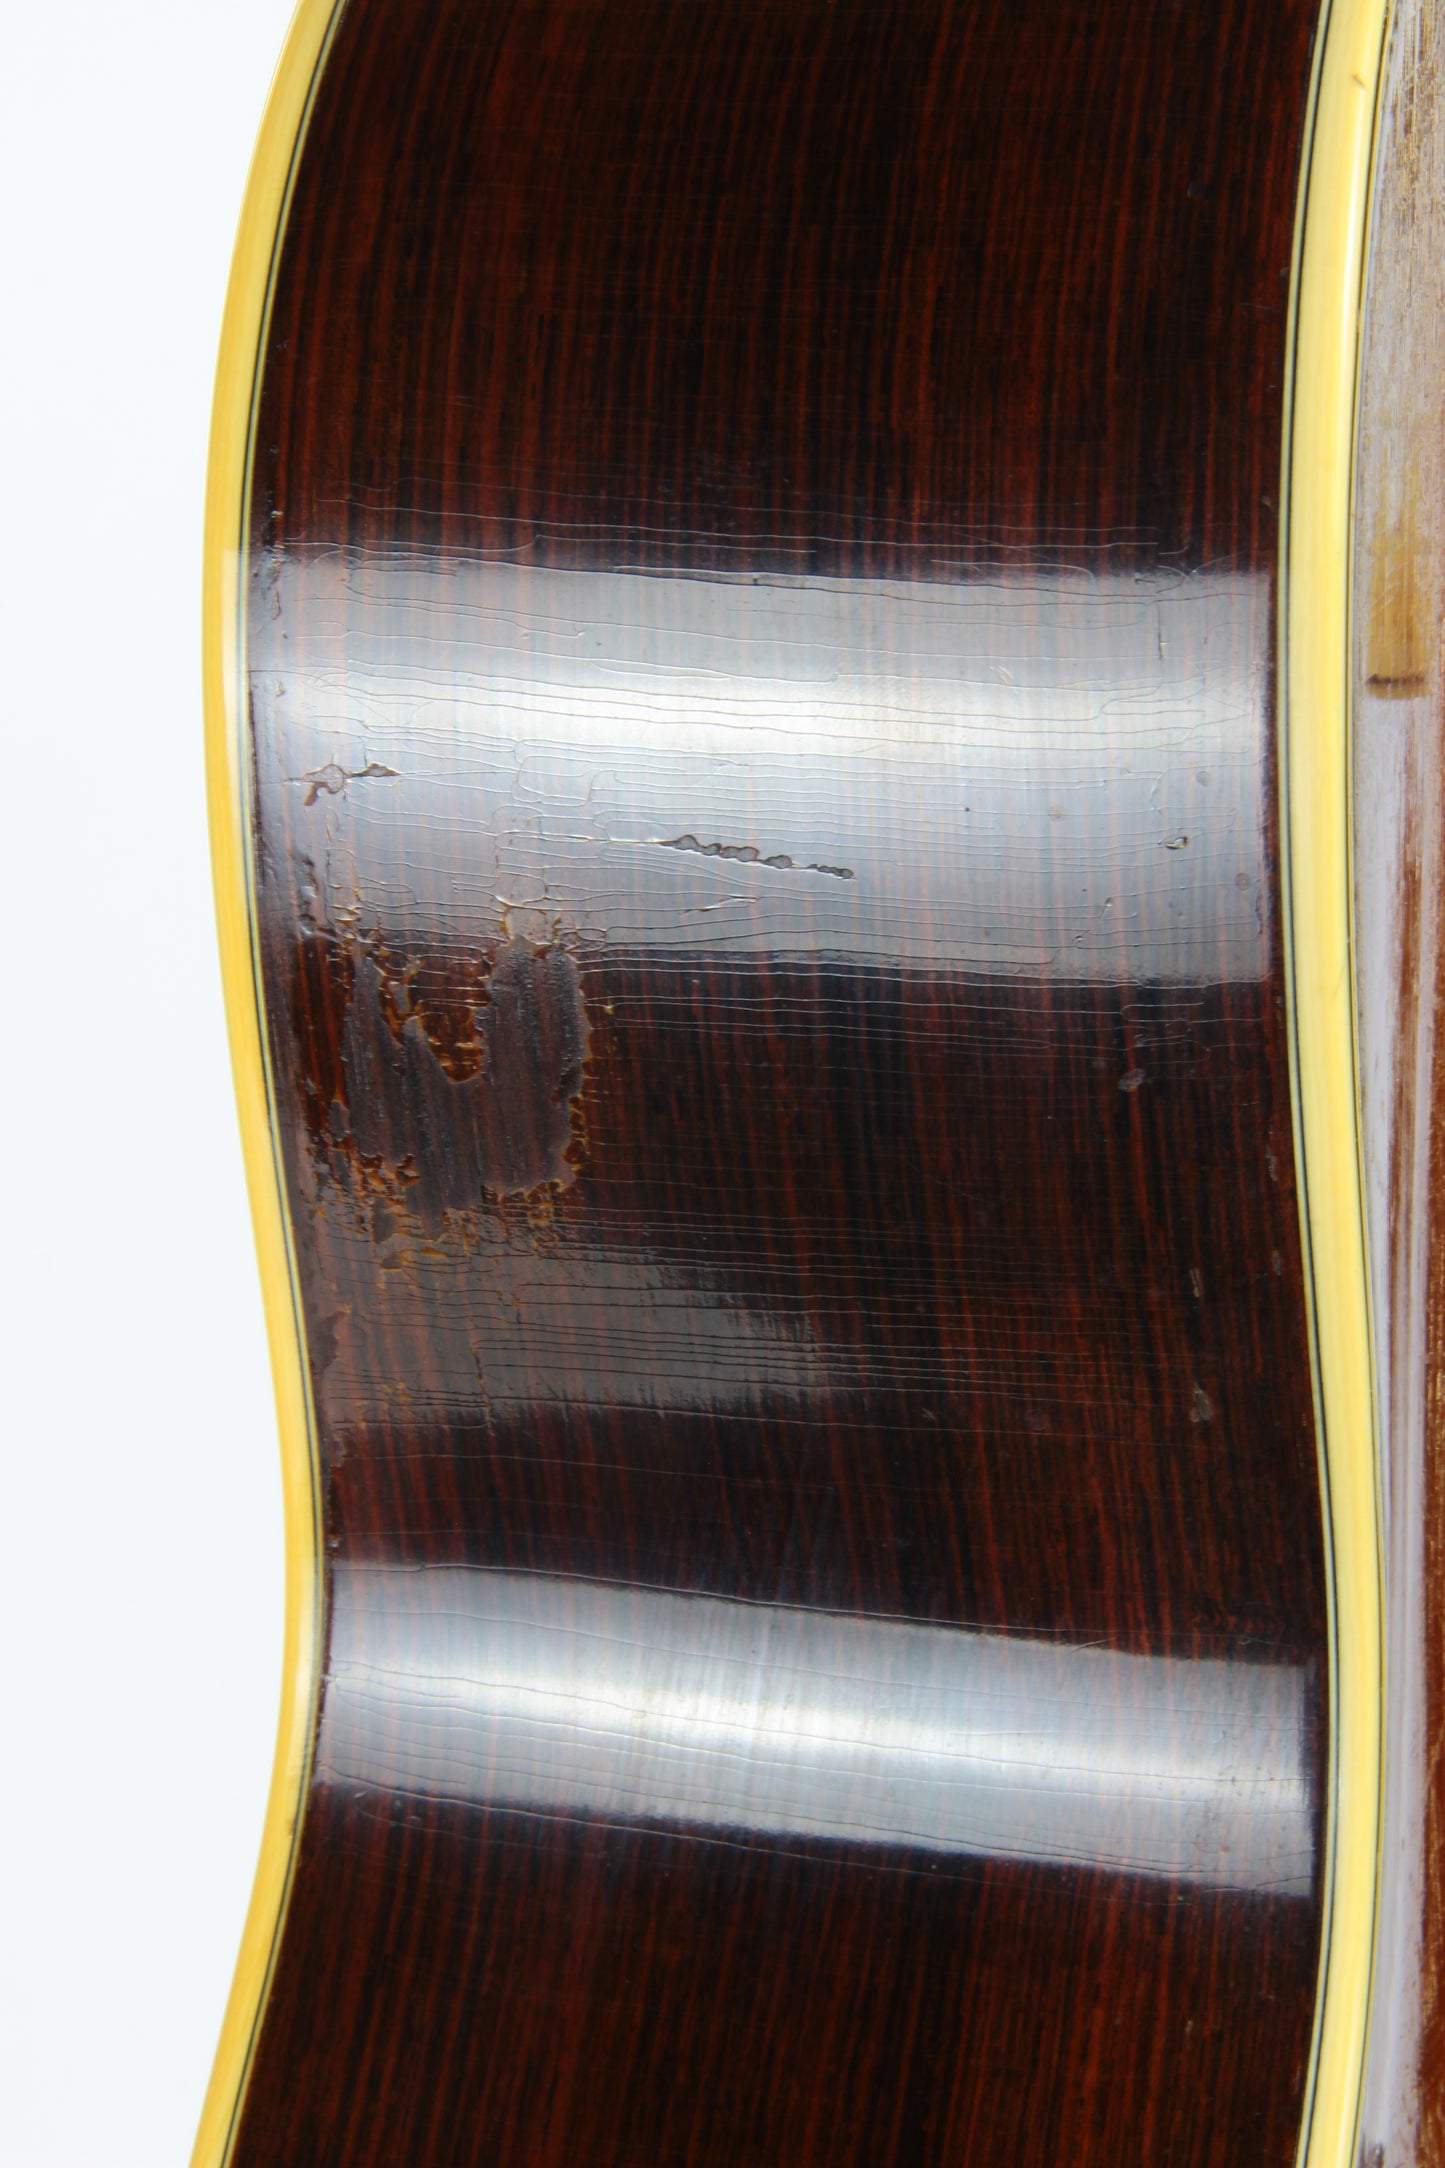 1931 Martin C-3 OM 000 Archtop - One Owner w/ Picture! - Brazilian Rosewood - Original Case - Shaded Top